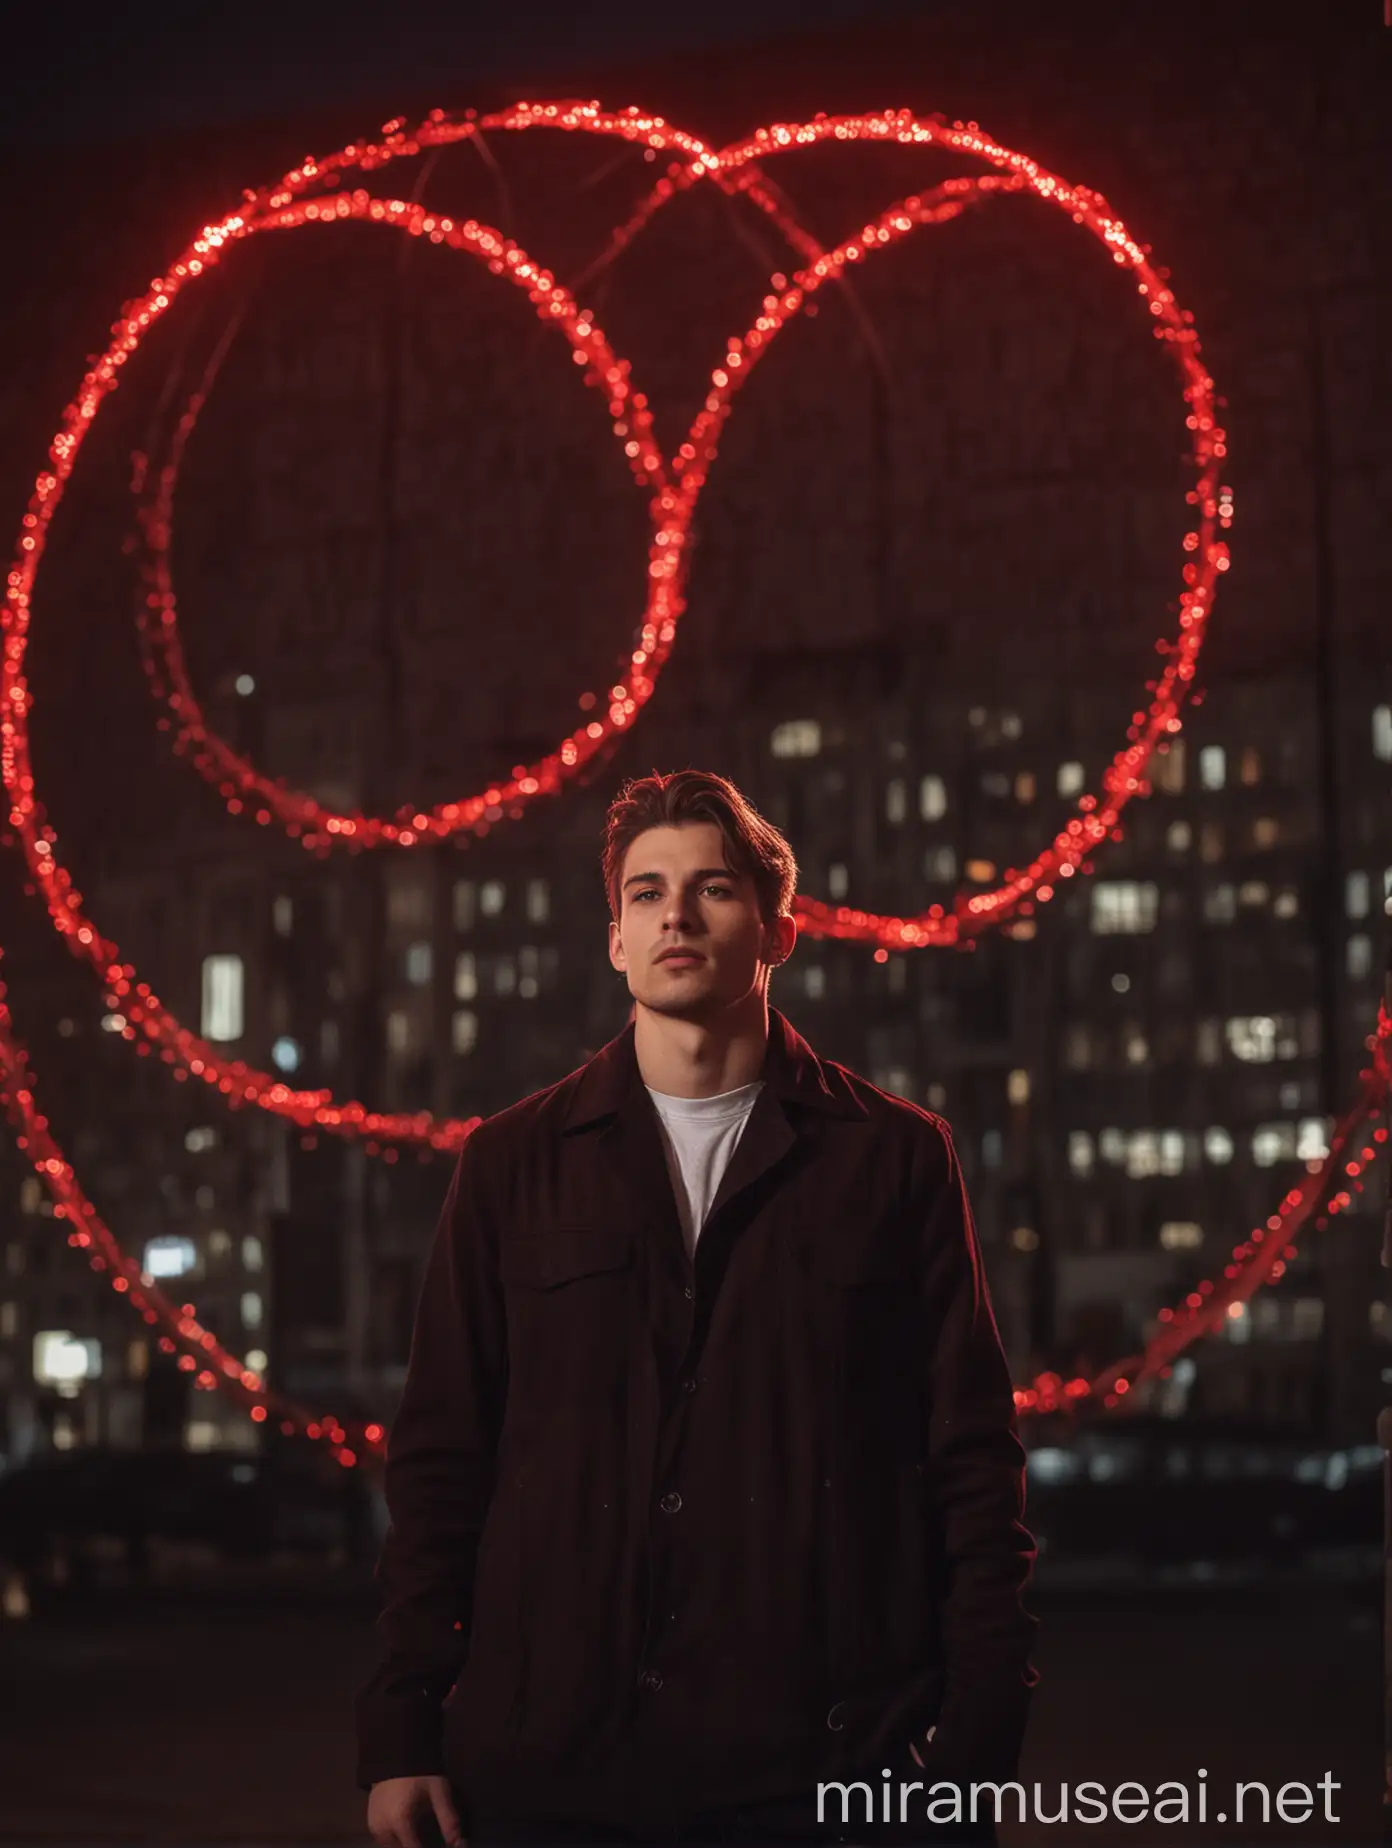 A handsome young man surrounded by red glowing luminous ring lights in the dark night, with a building behind him